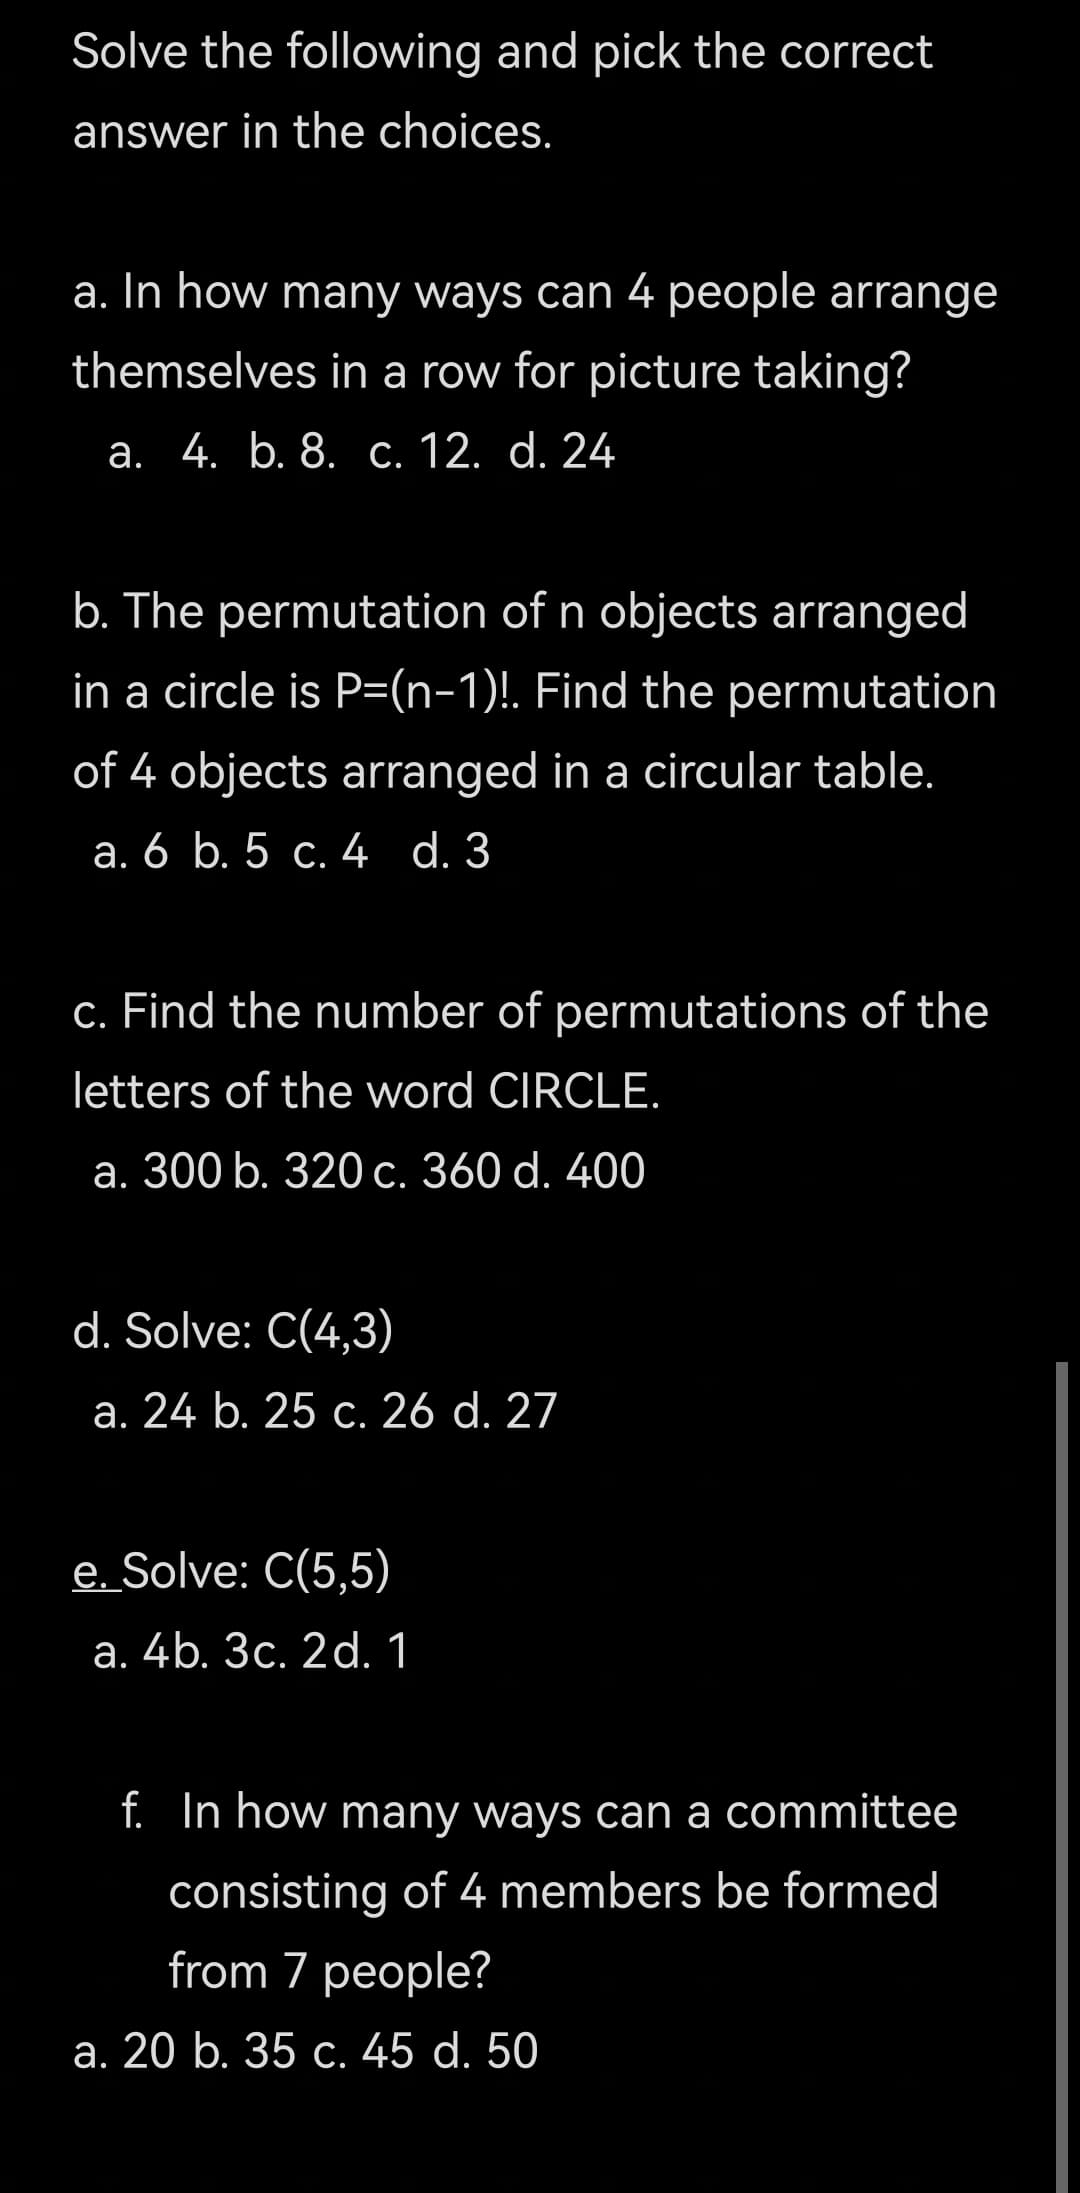 Solve the following and pick the correct
answer in the choices.
a. In how many ways can 4 people arrange
themselves in a row for picture taking?
а. 4. b. 8. с. 12. d. 24
b. The permutation of n objects arranged
in a circle is P=(n-1)!. Find the permutation
of 4 objects arranged in a circular table.
а. 6 b. 5 с. 4 d. 3
c. Find the number of permutations of the
letters of the word CIRCLE.
а. 300 b. 320 с. 360 d. 400
d. Solve: C(4,3)
а. 24 b. 25 с. 26 d. 27
e. Solve: C(5,5)
а. 4b. Зс. 2d. 1
f. In how many ways can a committee
consisting of 4 members be formed
from 7 people?
а. 20 b. 35 с. 45 d. 50
